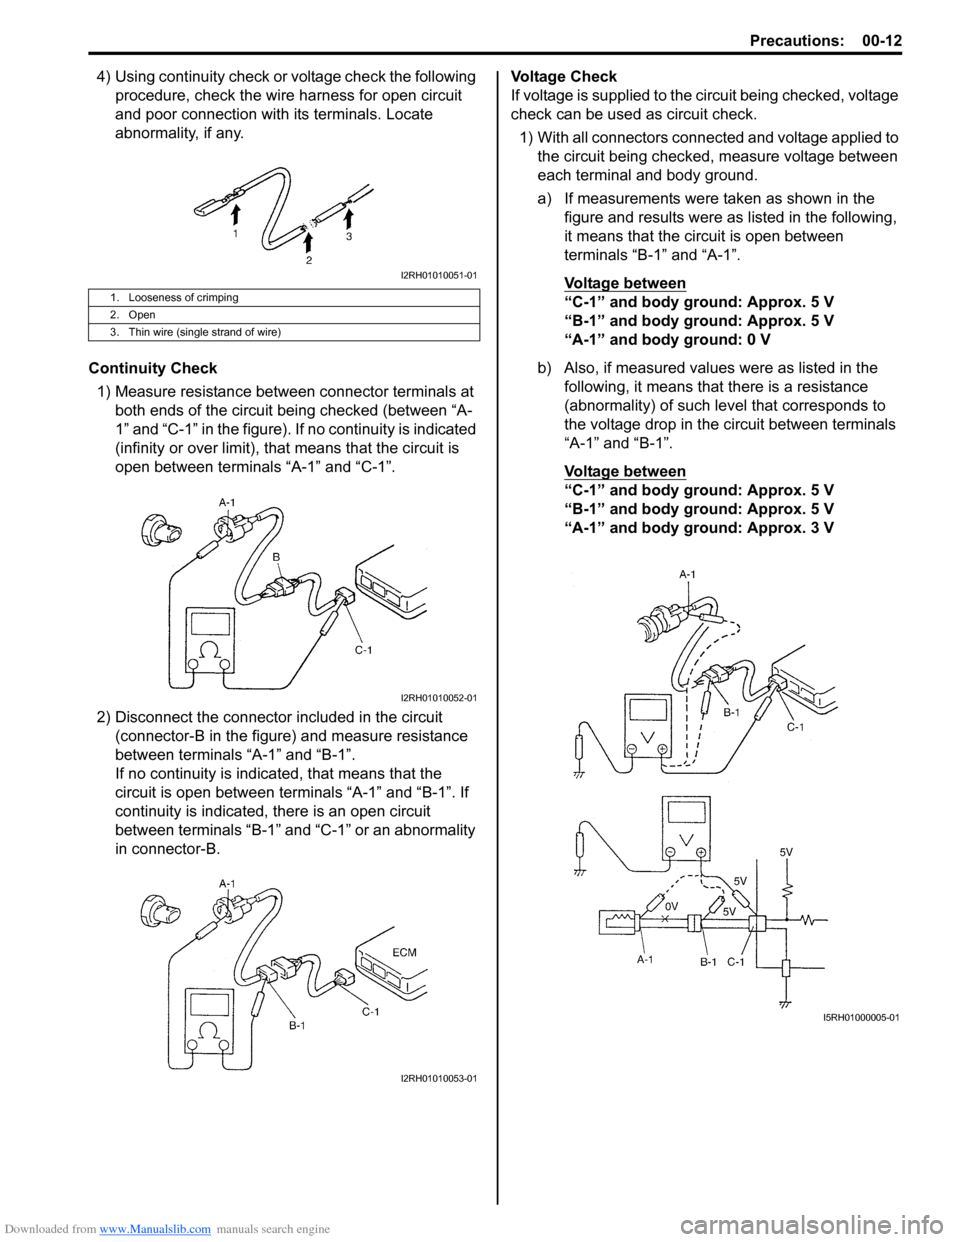 SUZUKI SWIFT 2005 2.G Service User Guide Downloaded from www.Manualslib.com manuals search engine Precautions: 00-12
4) Using continuity check or voltage check the following procedure, check the wire harness for open circuit 
and poor connec